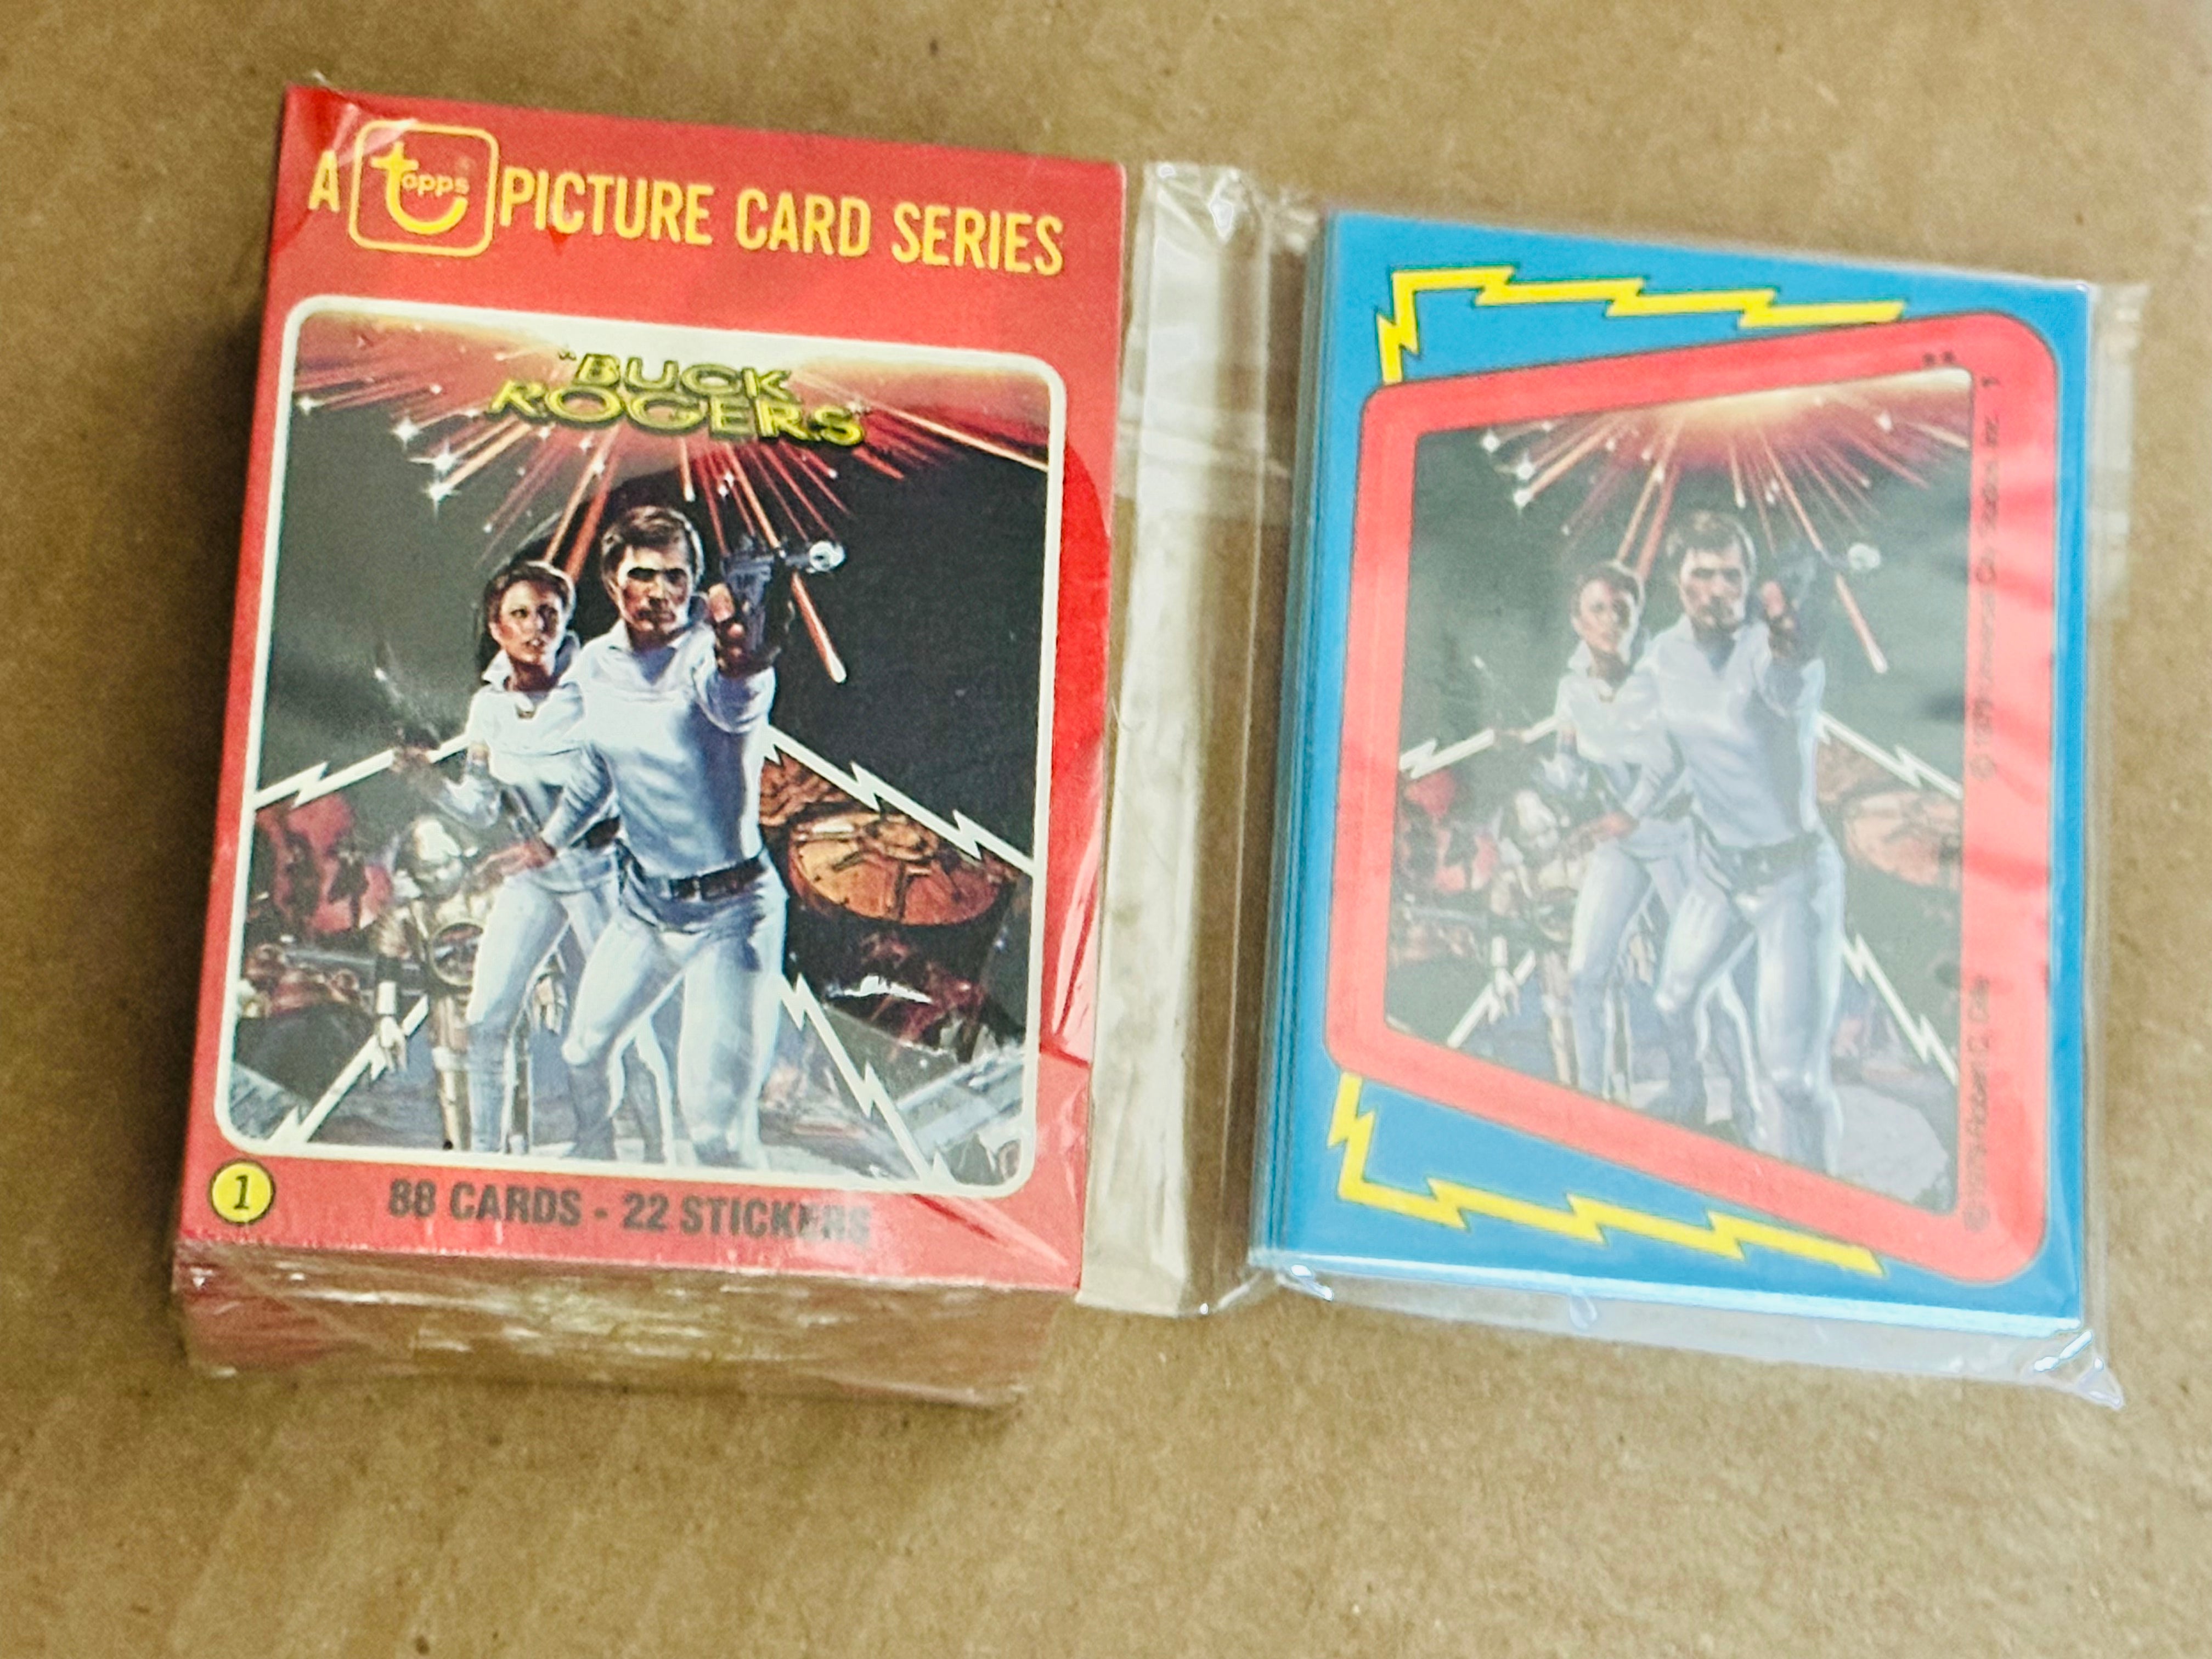 Buck Rogers TV show rare cards and stickers set 1979